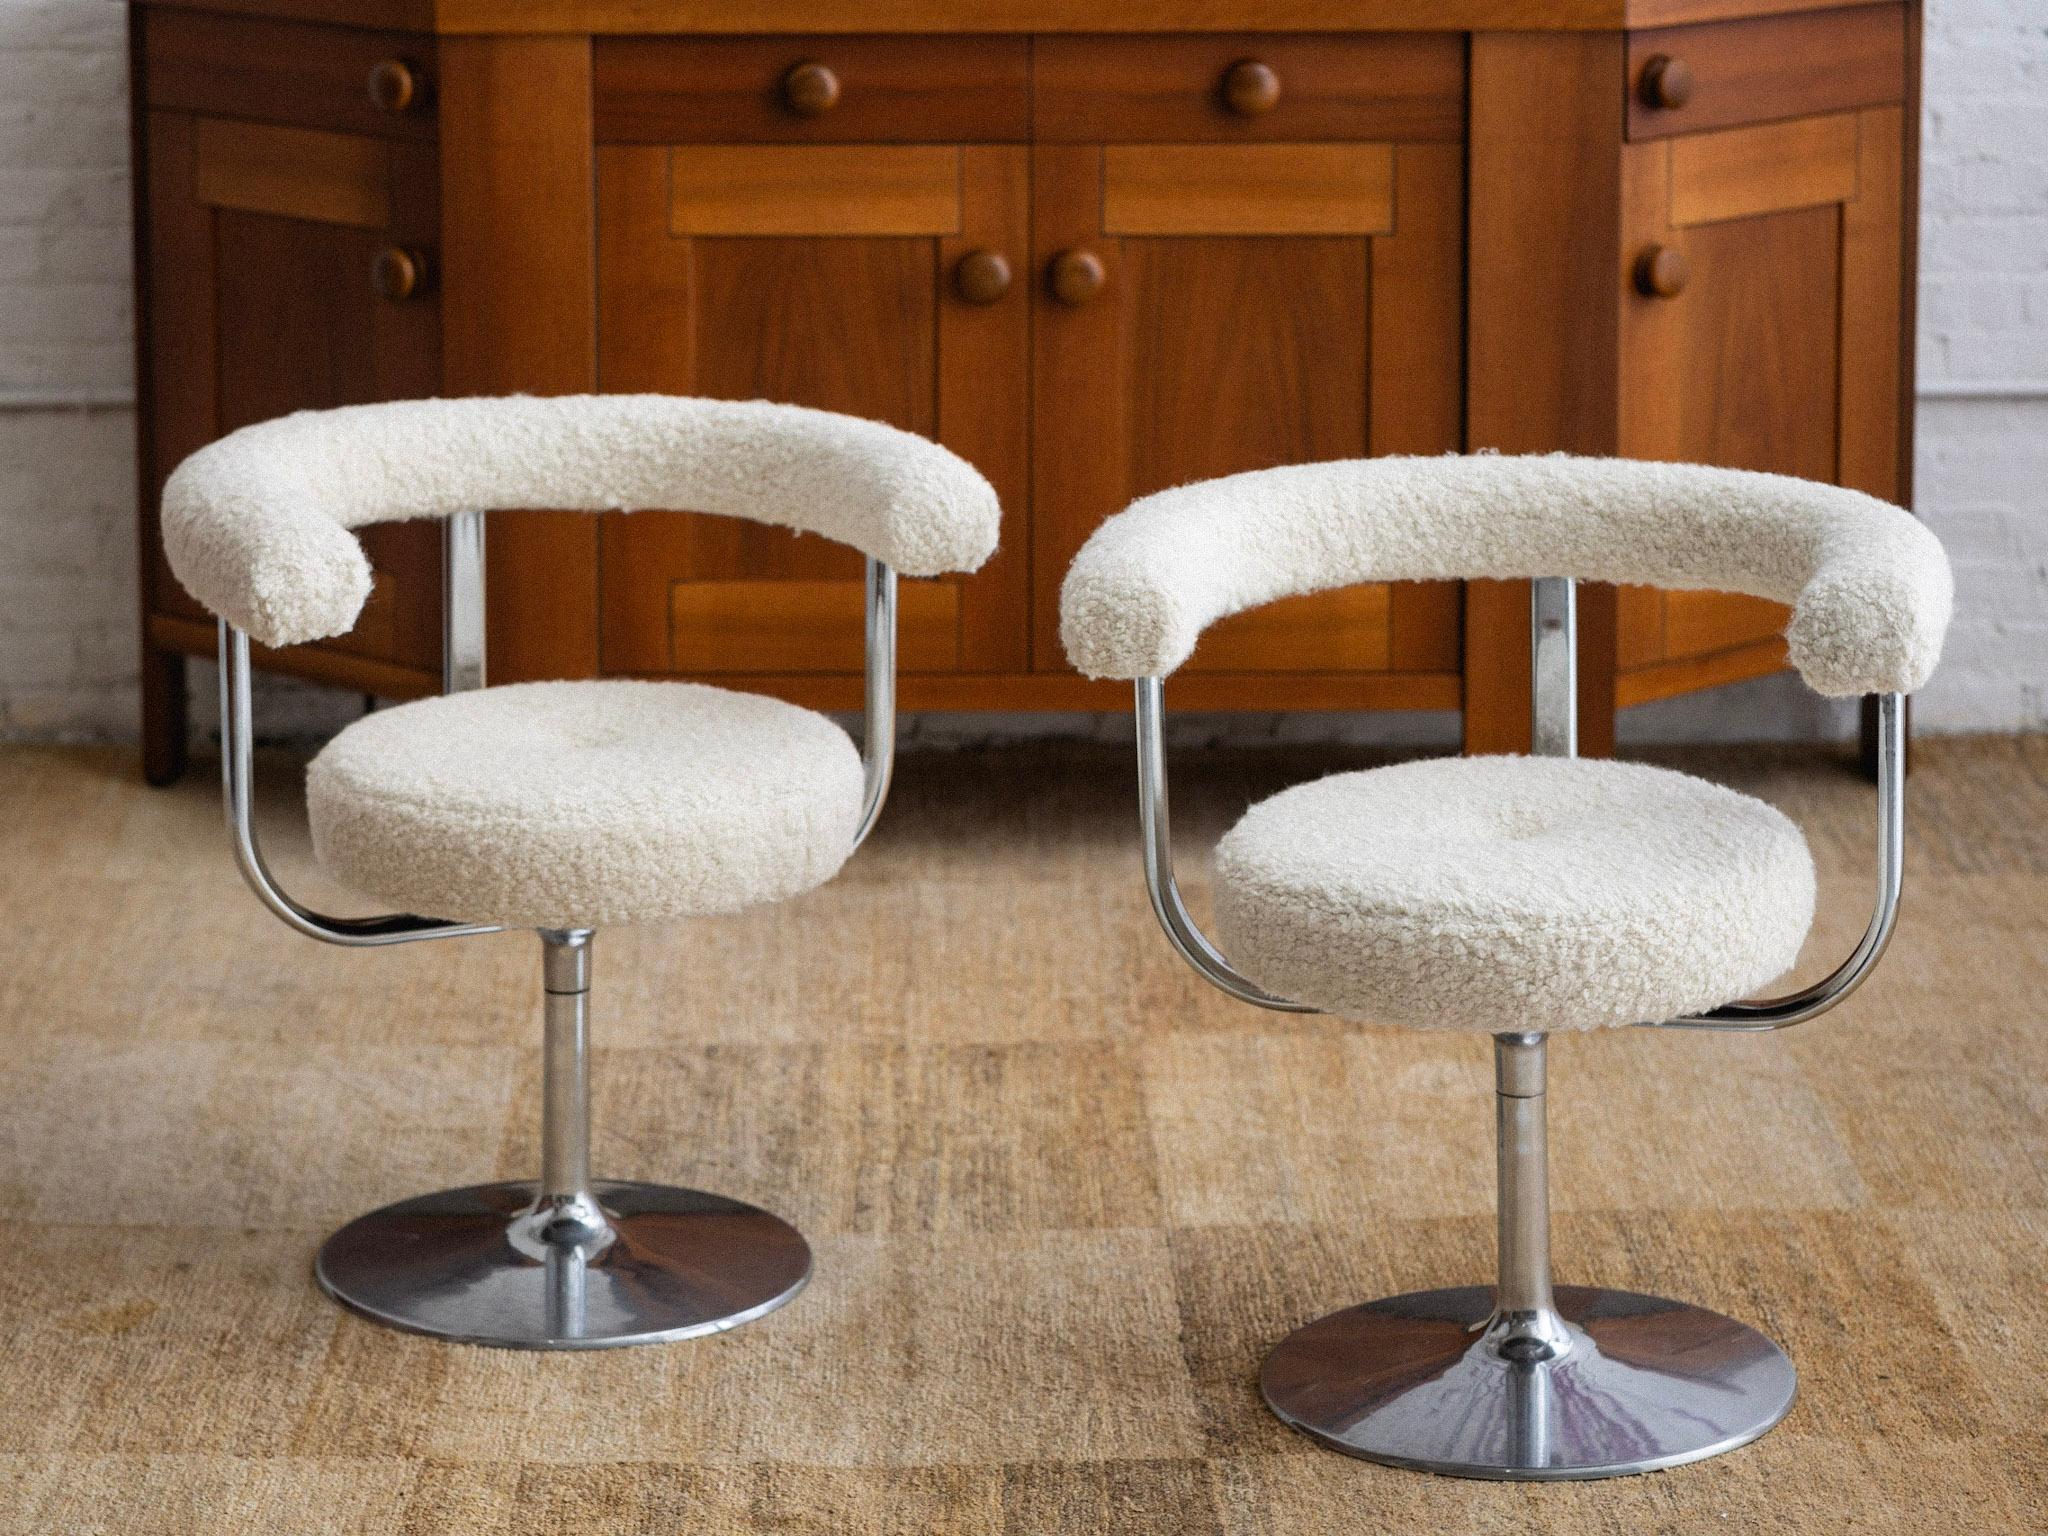 A 1960s pair of “Polar L-1001P” chairs by Esko Pajamies for Lepo, Finland. Rotating seats sit atop heavy tulip style chrome bases. Newly reupholstered in high quality soft wool teddy bouclé. Retains original “Lepo Finn” tags.